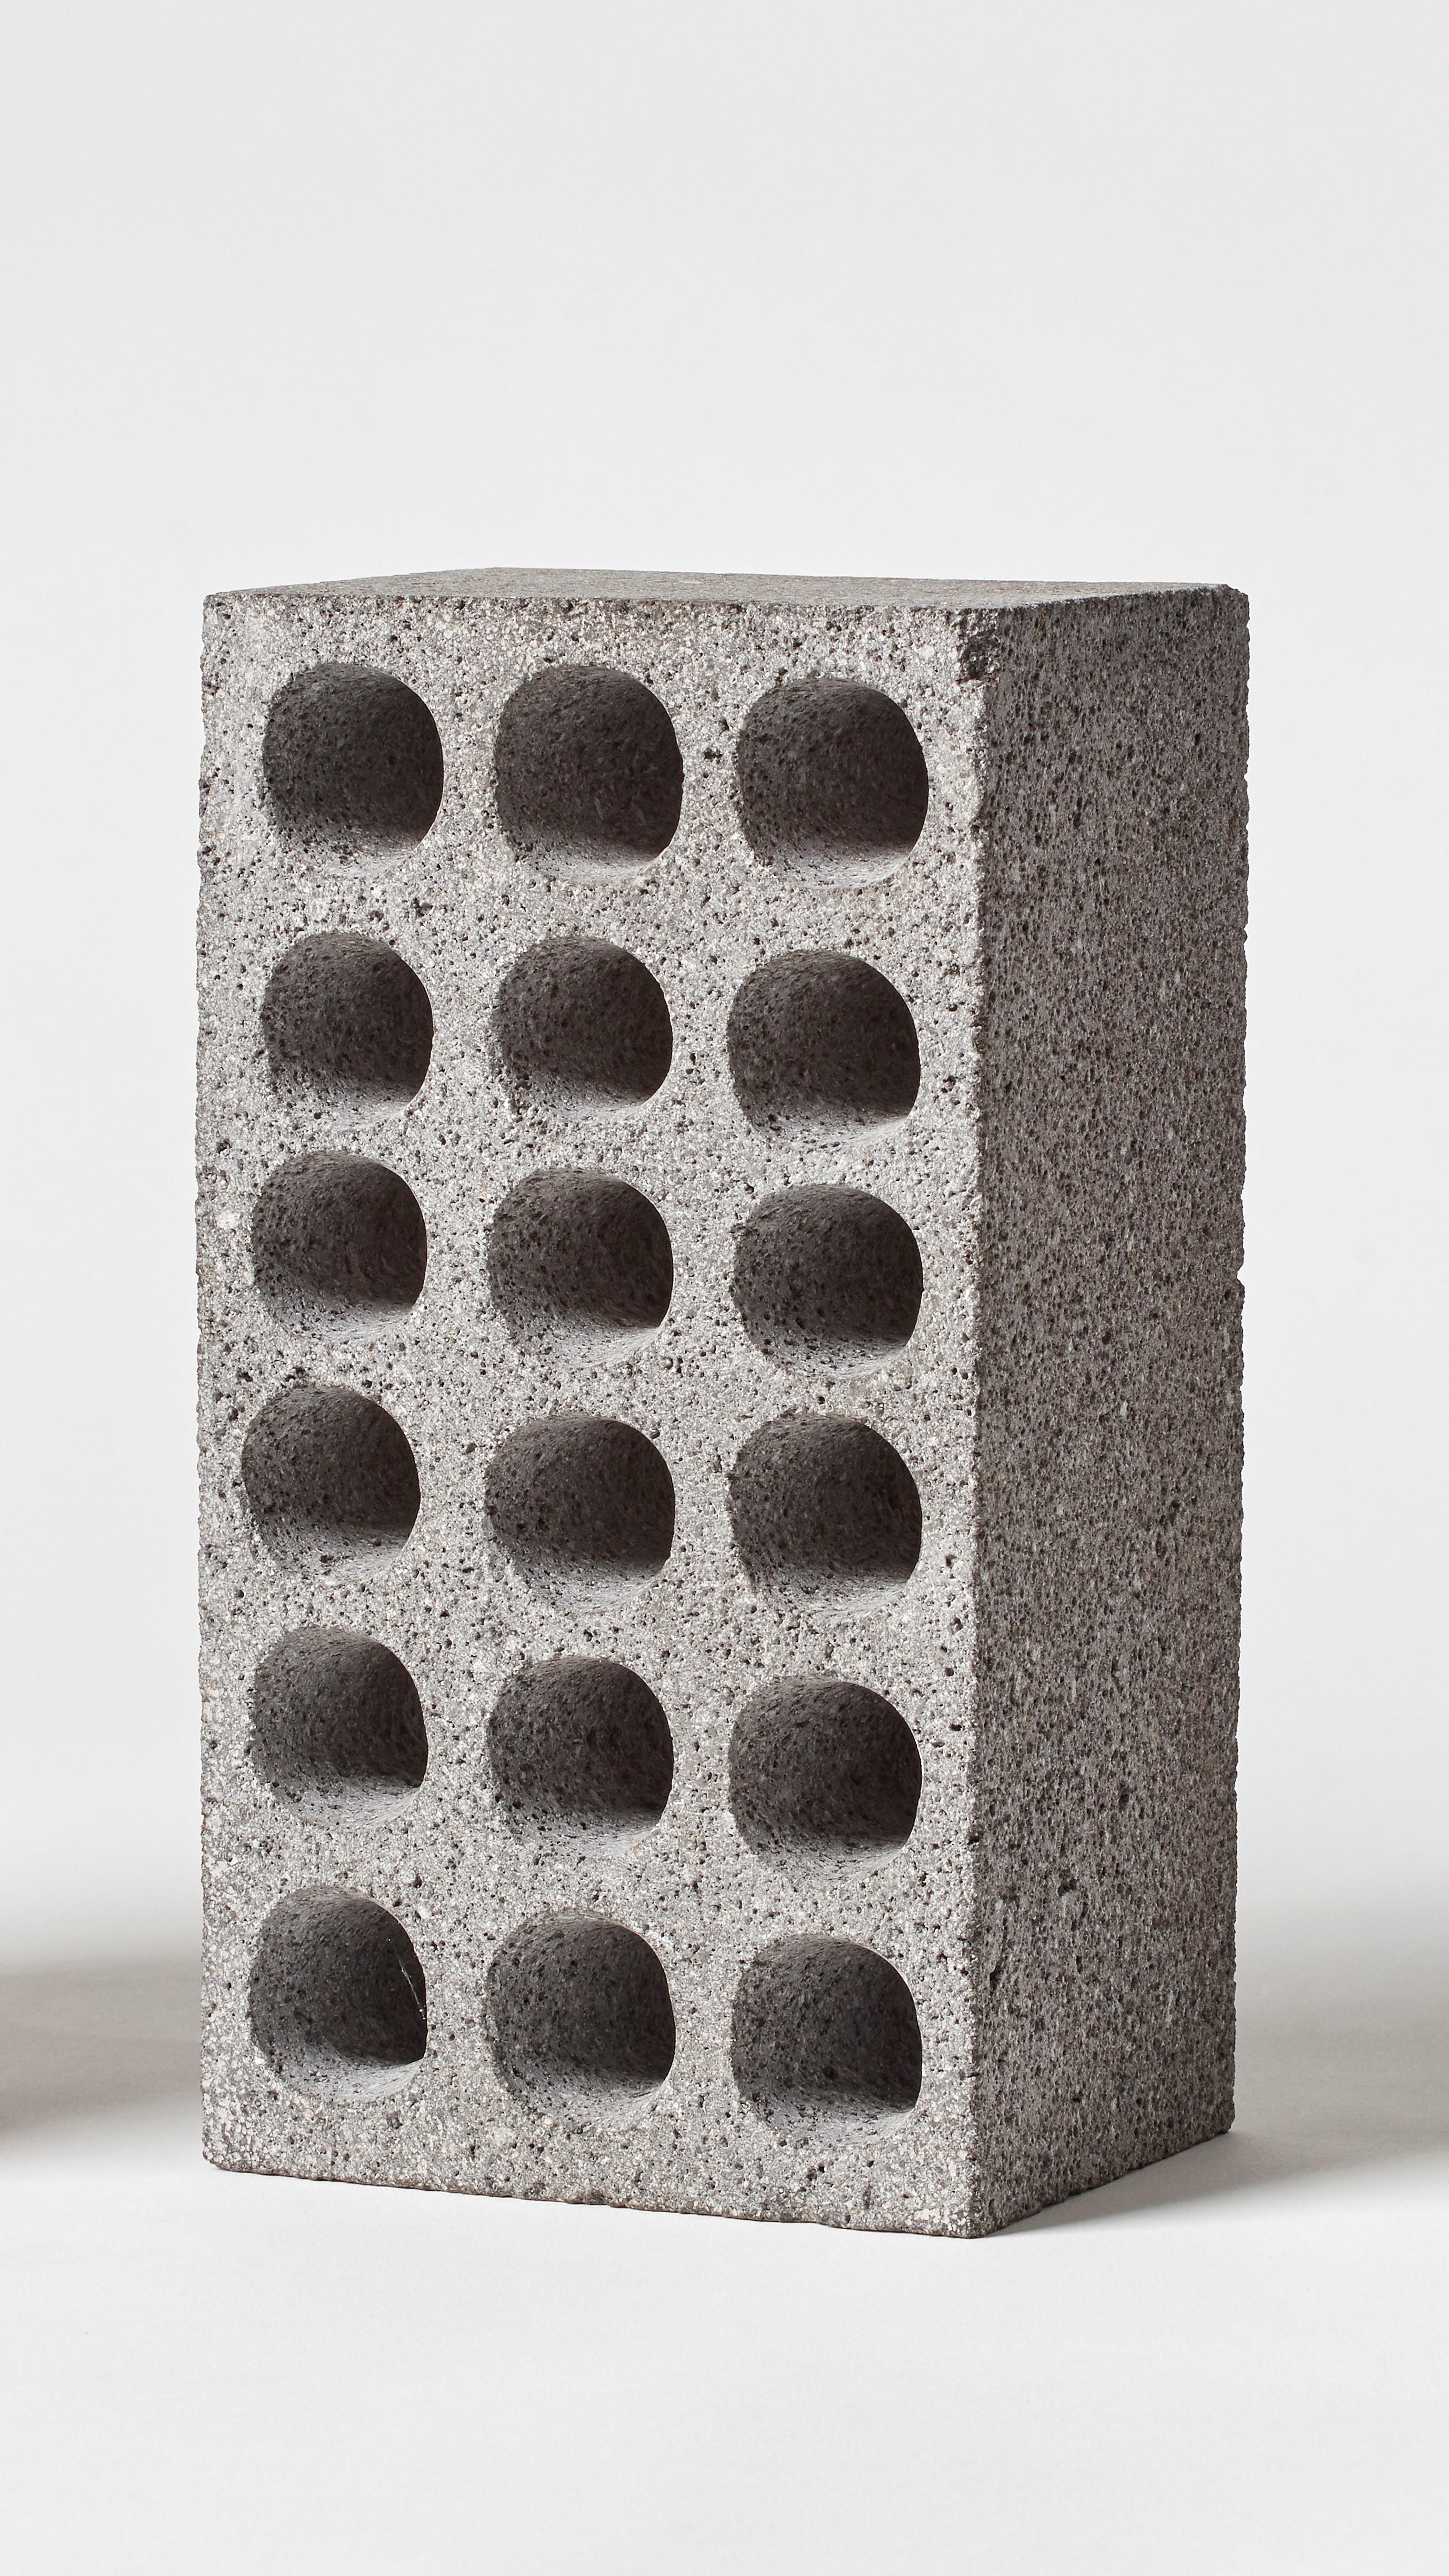 BRICK by Estudio Rafael Freyre
Dimensions: W 12.5 D 9 x H 23 cm 
Materials: Andes Stones
Also Available: Other finishes available.

The brick is a generic constructive element that constitutes part of the urban imaginary. In Peru, moreover, its